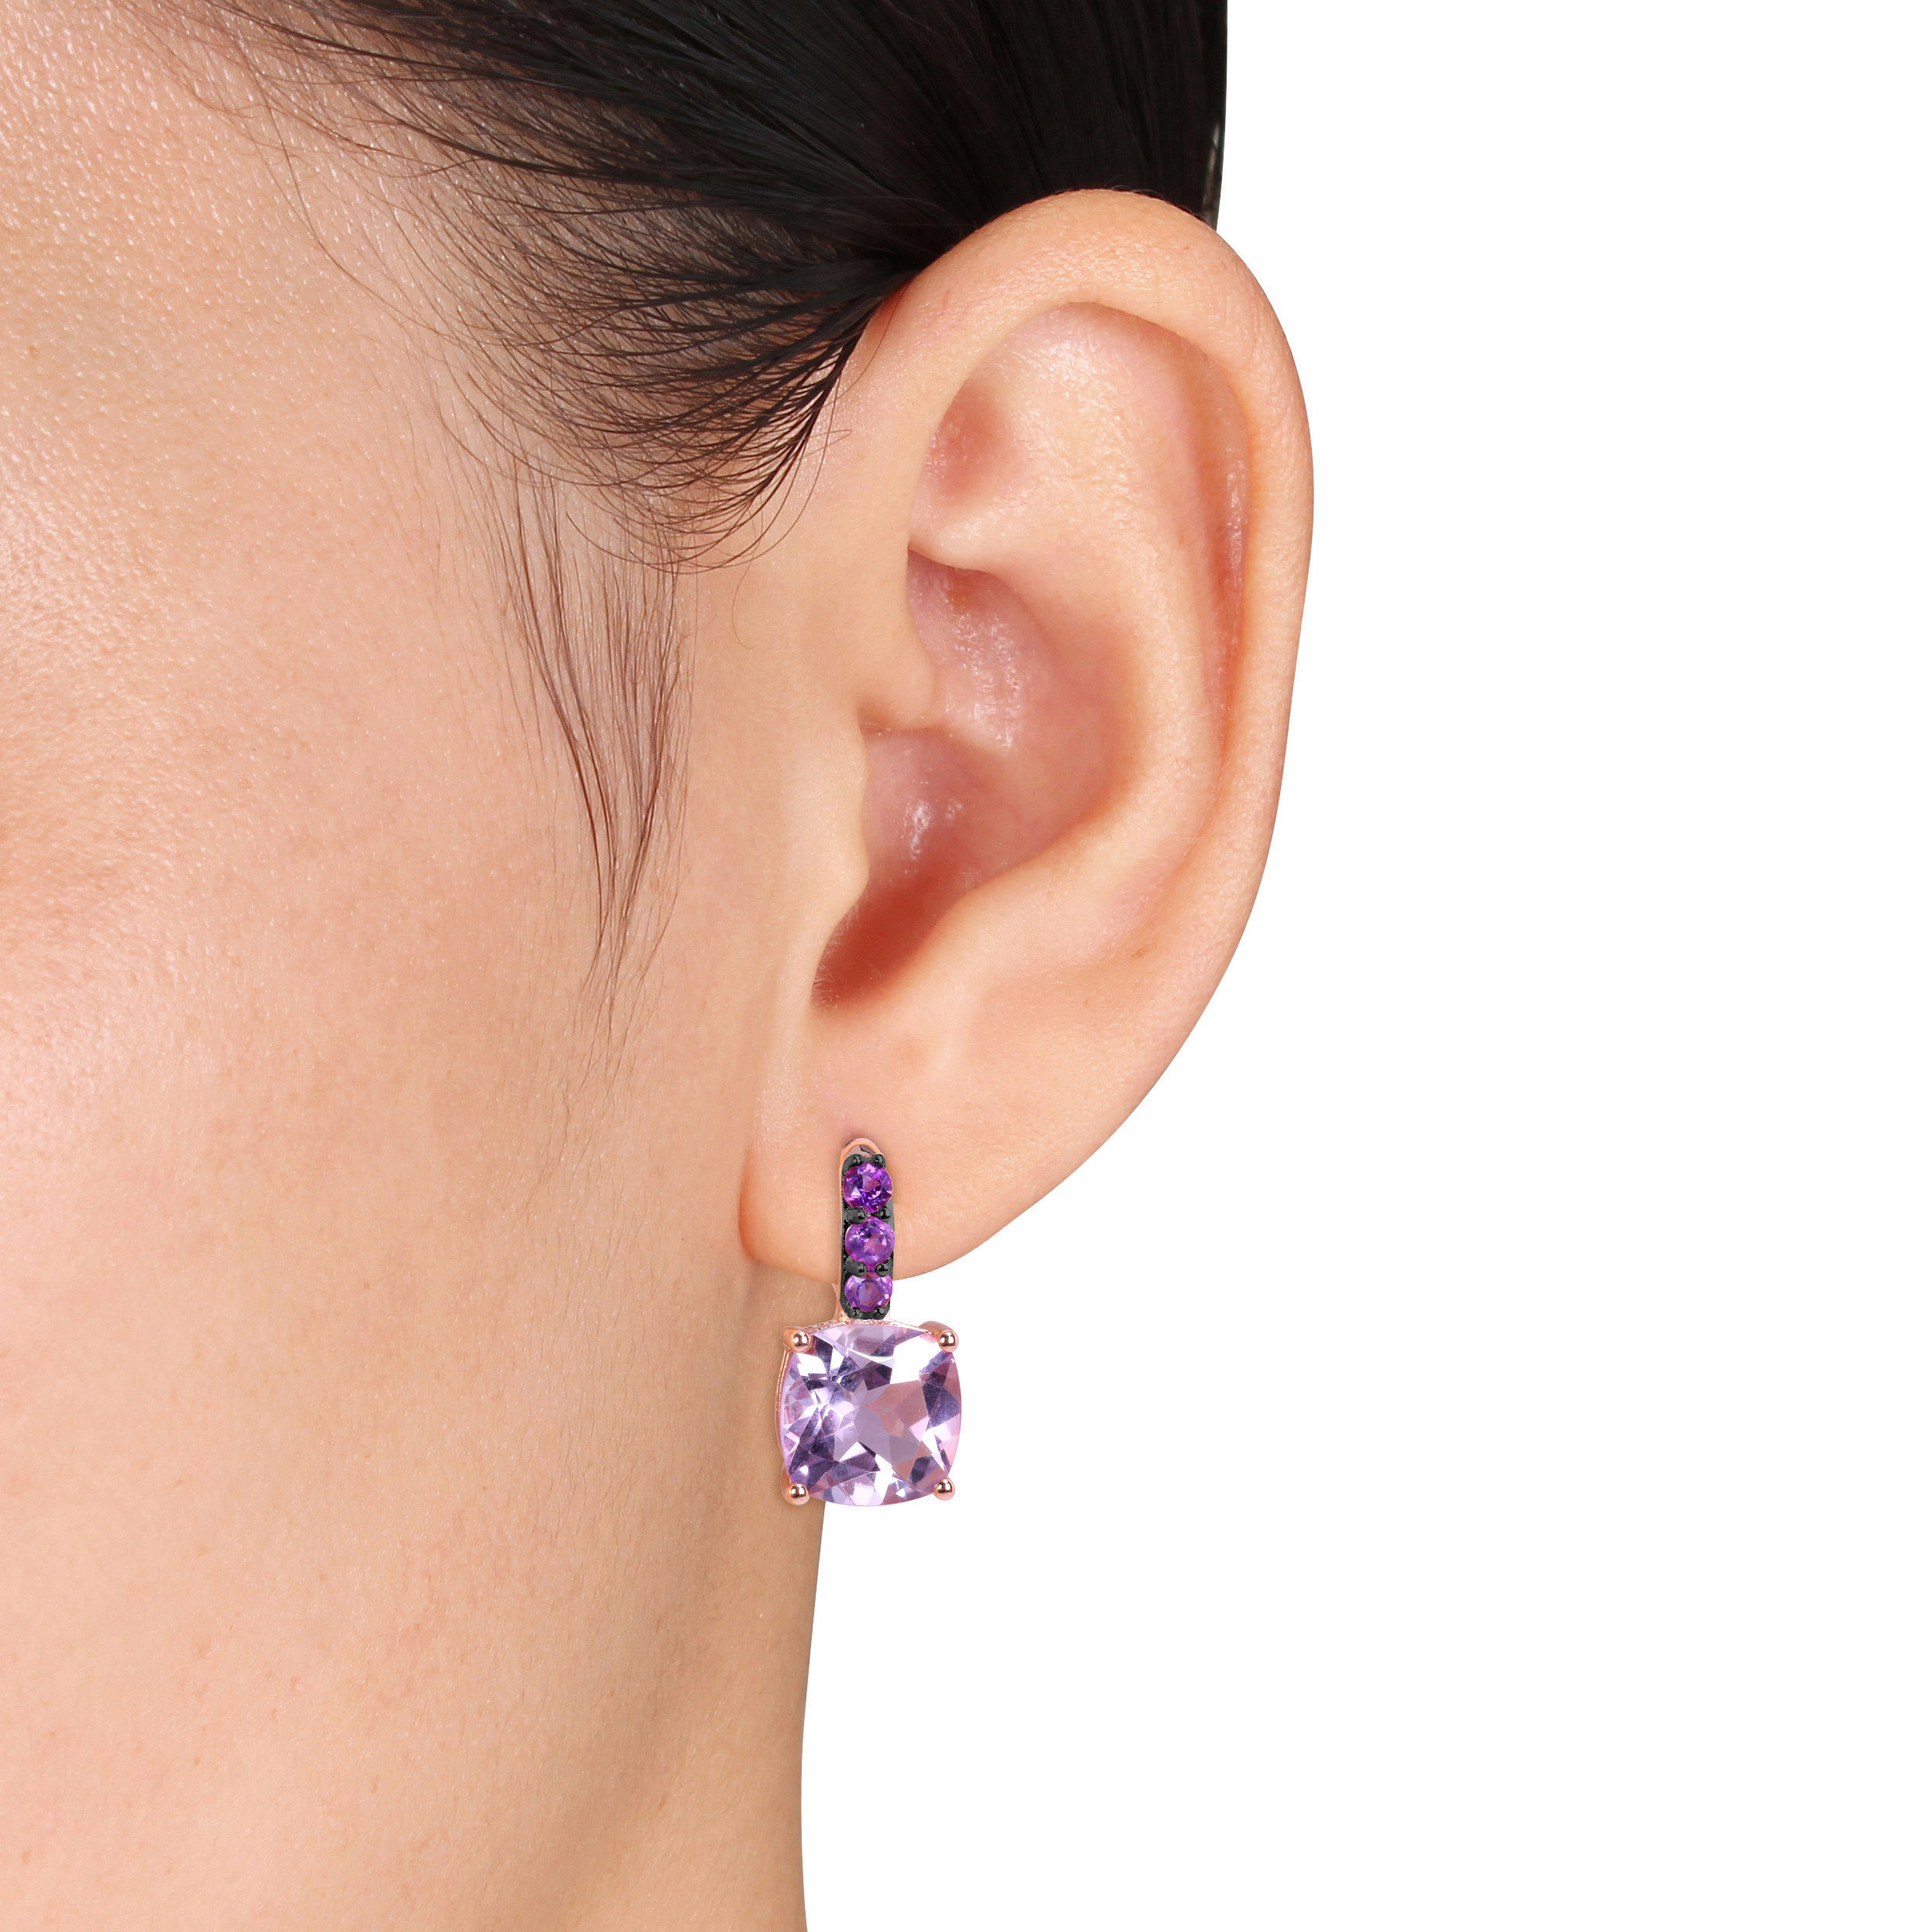 15 1/2 CT TGW Rose de France and Amethyst Leverback Earrings in Rose Plated Sterling Silver